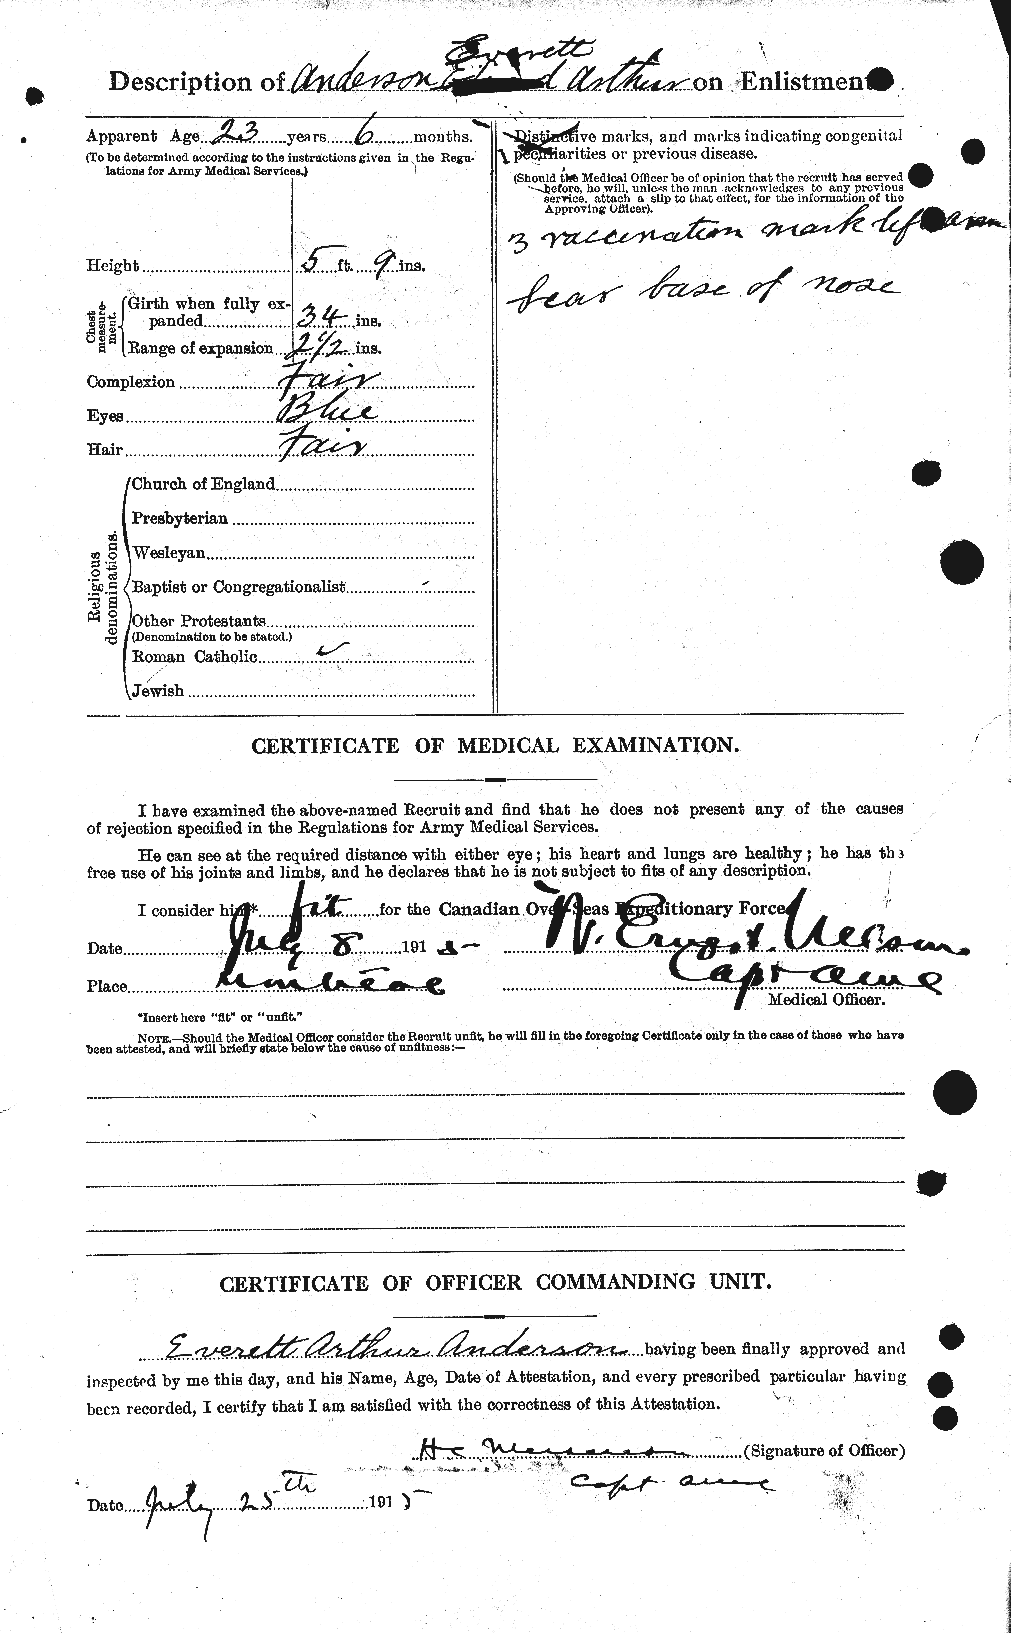 Personnel Records of the First World War - CEF 209873b